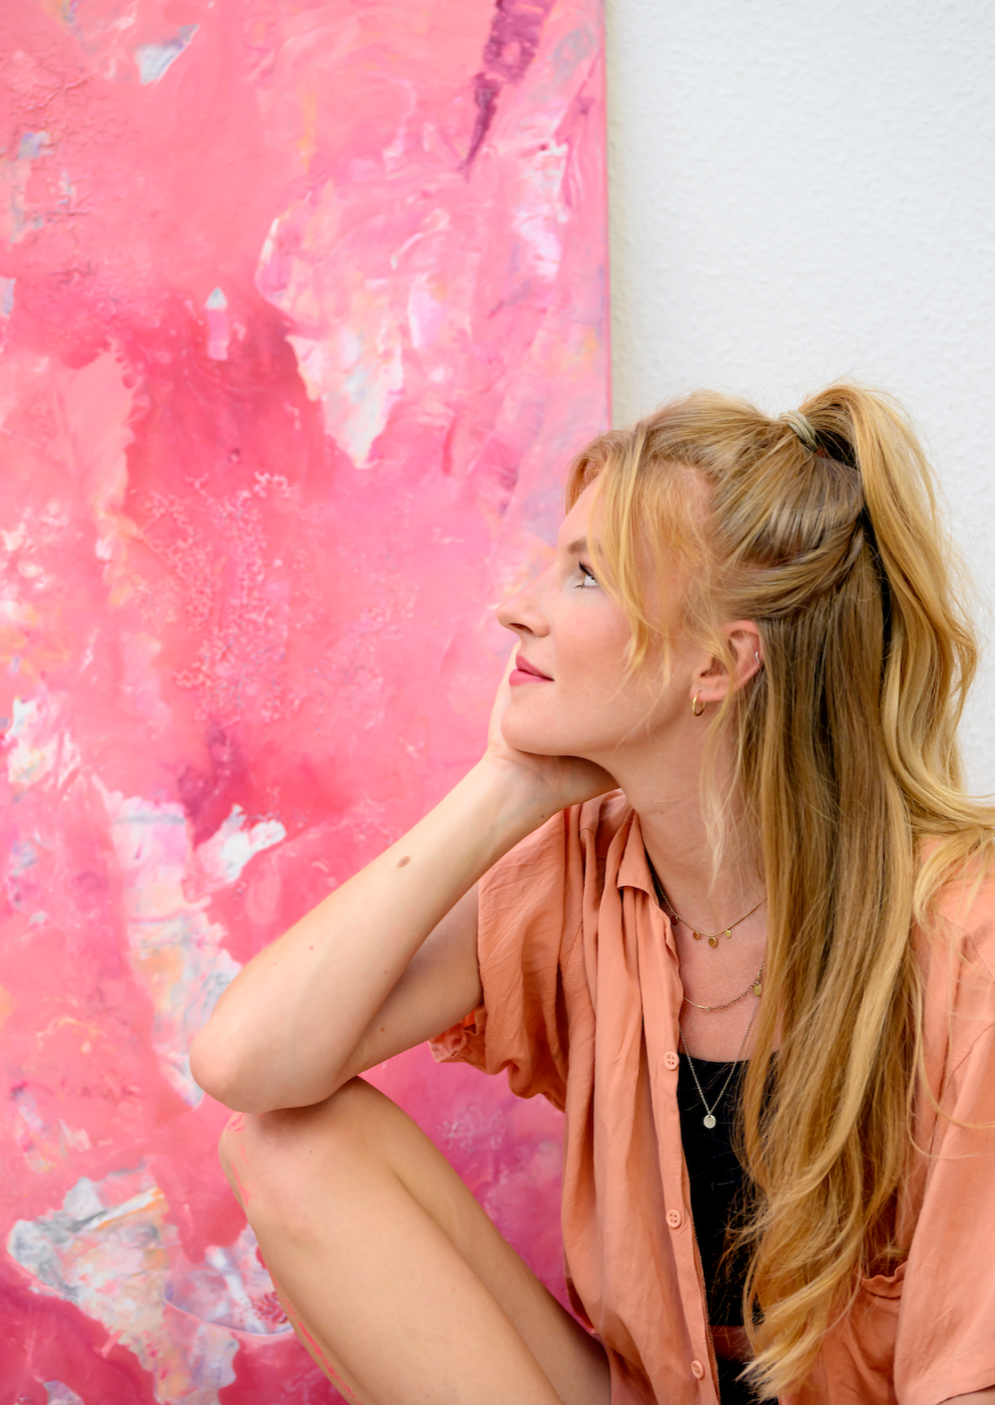 "Paint Your Soul" - Intuitive Painting Workshop with Marleen in Cologne, Germany